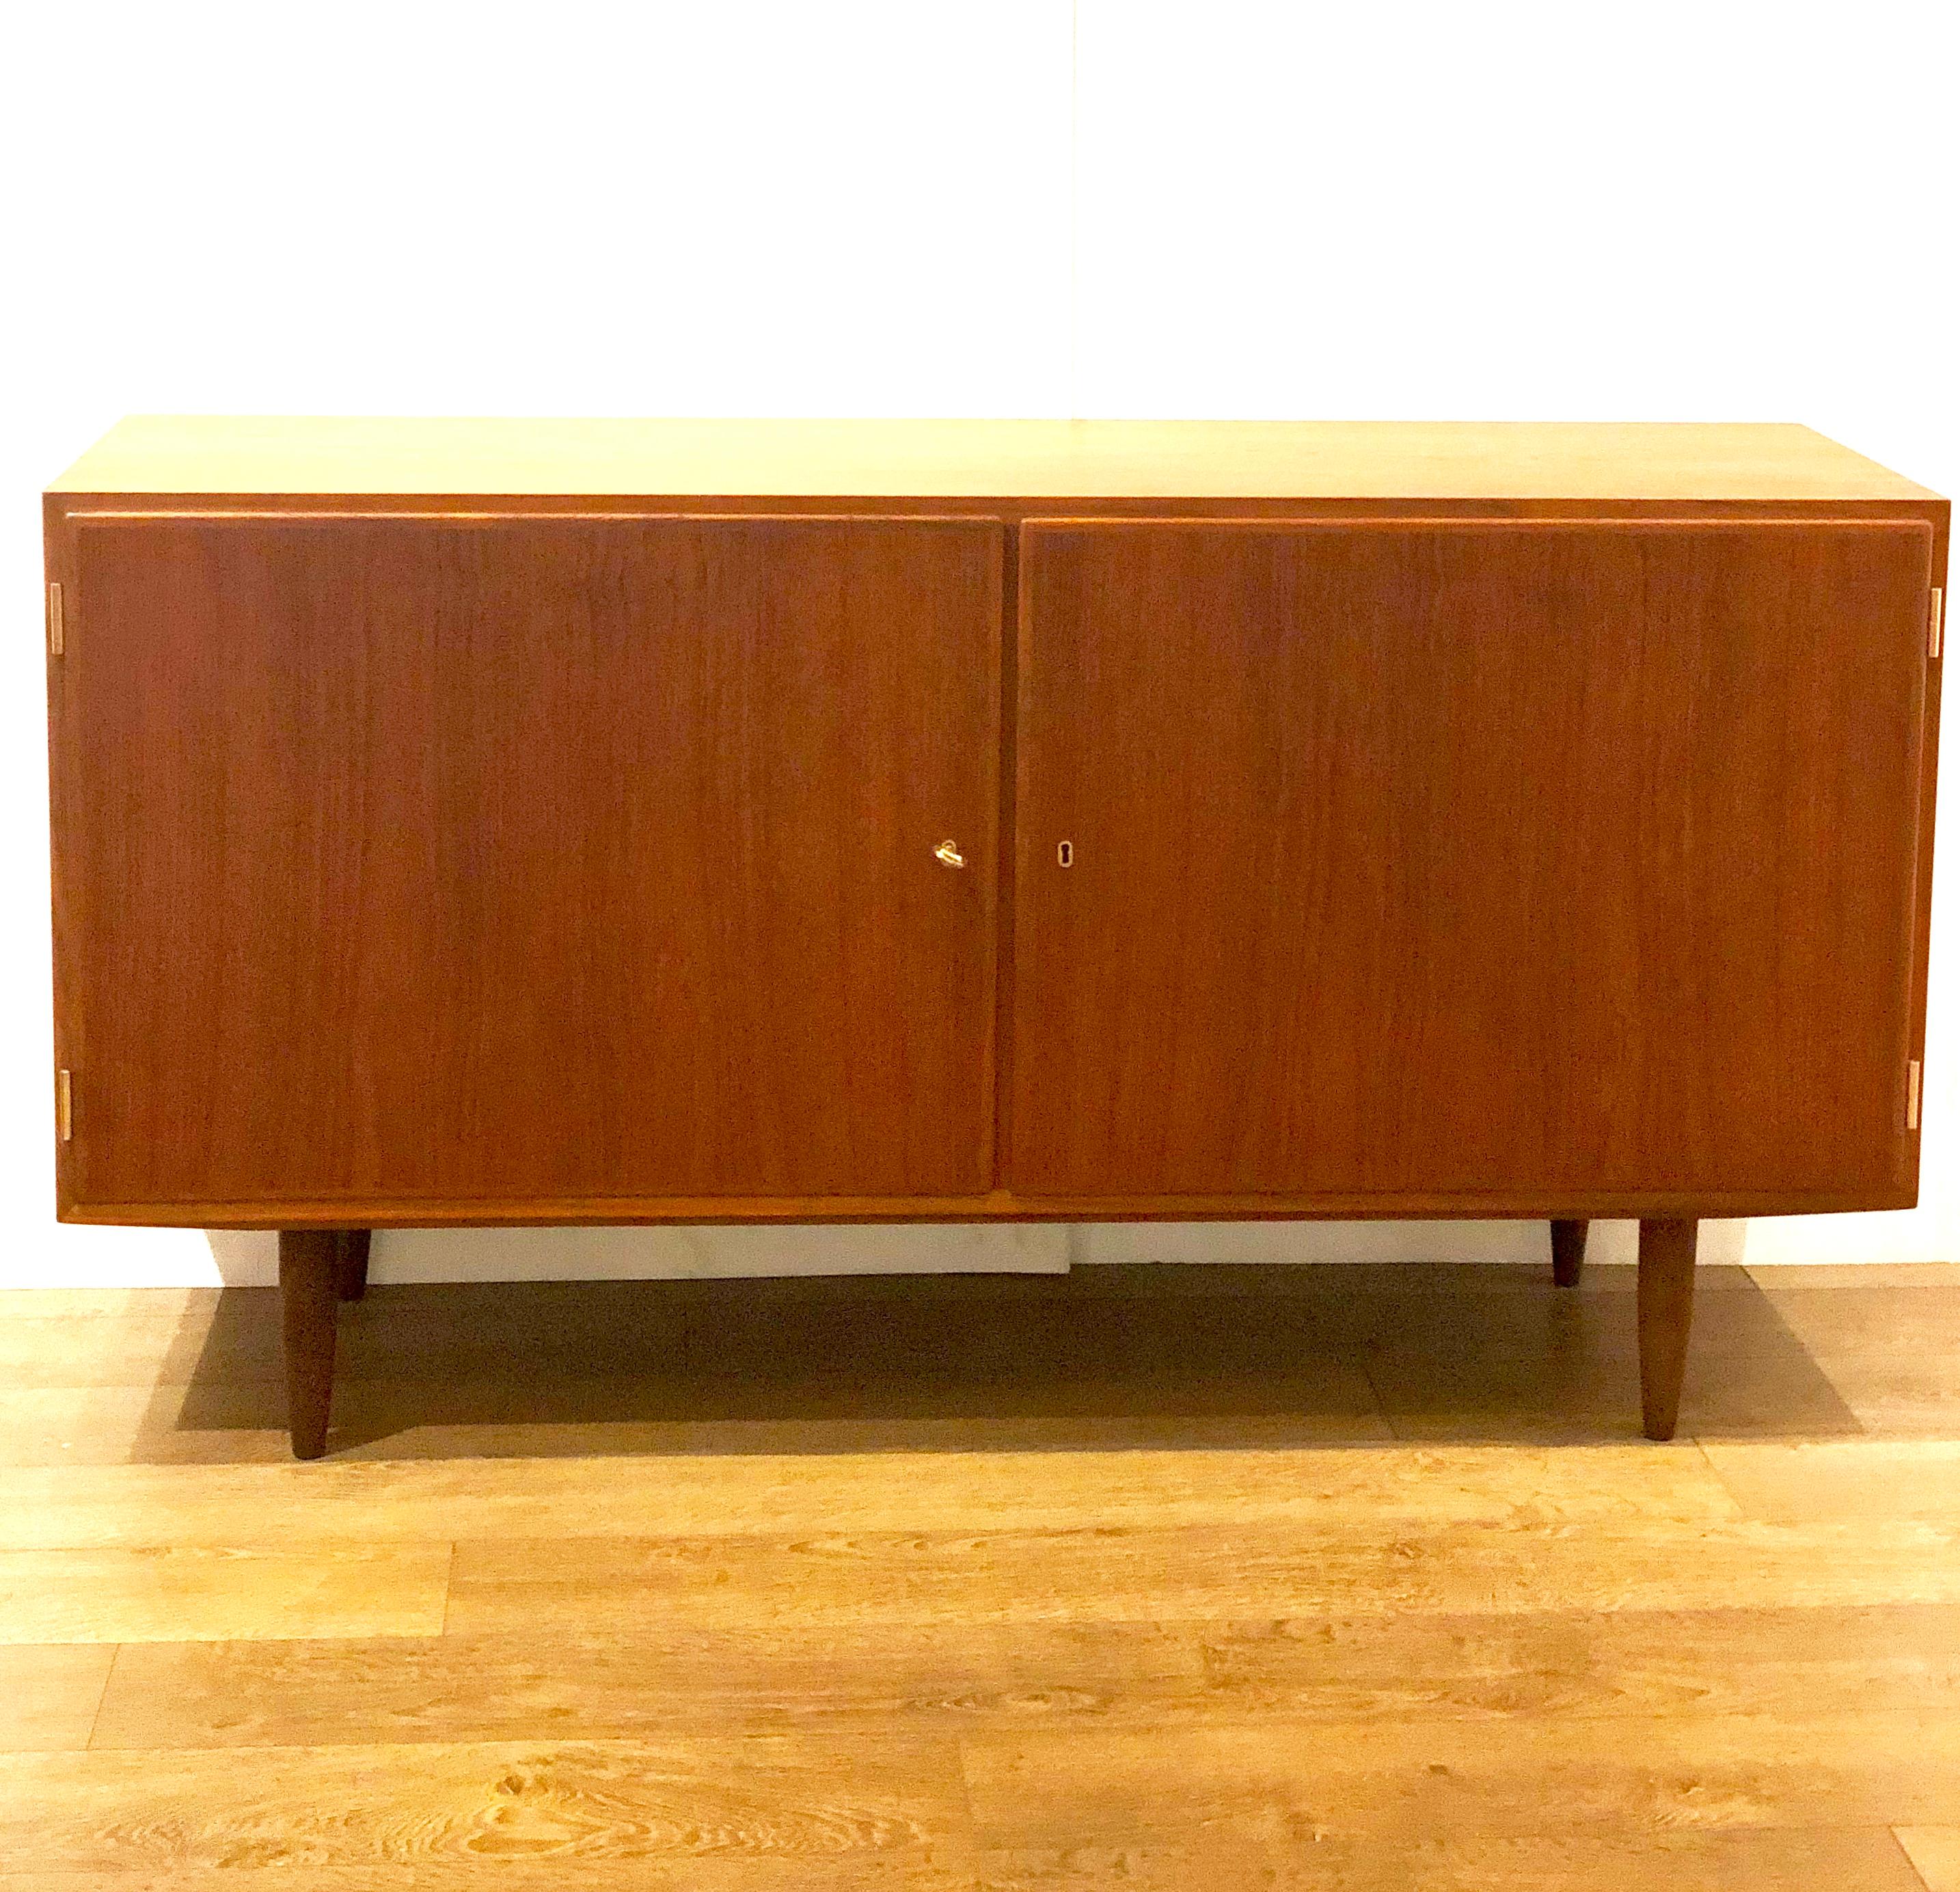 Versatyle double door cabinet designed by Hovmand Olsen in teak, with original brass key for the doors, shelves on one side drawers on the other side, this piece its high quality design and has the Danish control tag and its stamped in the back, the